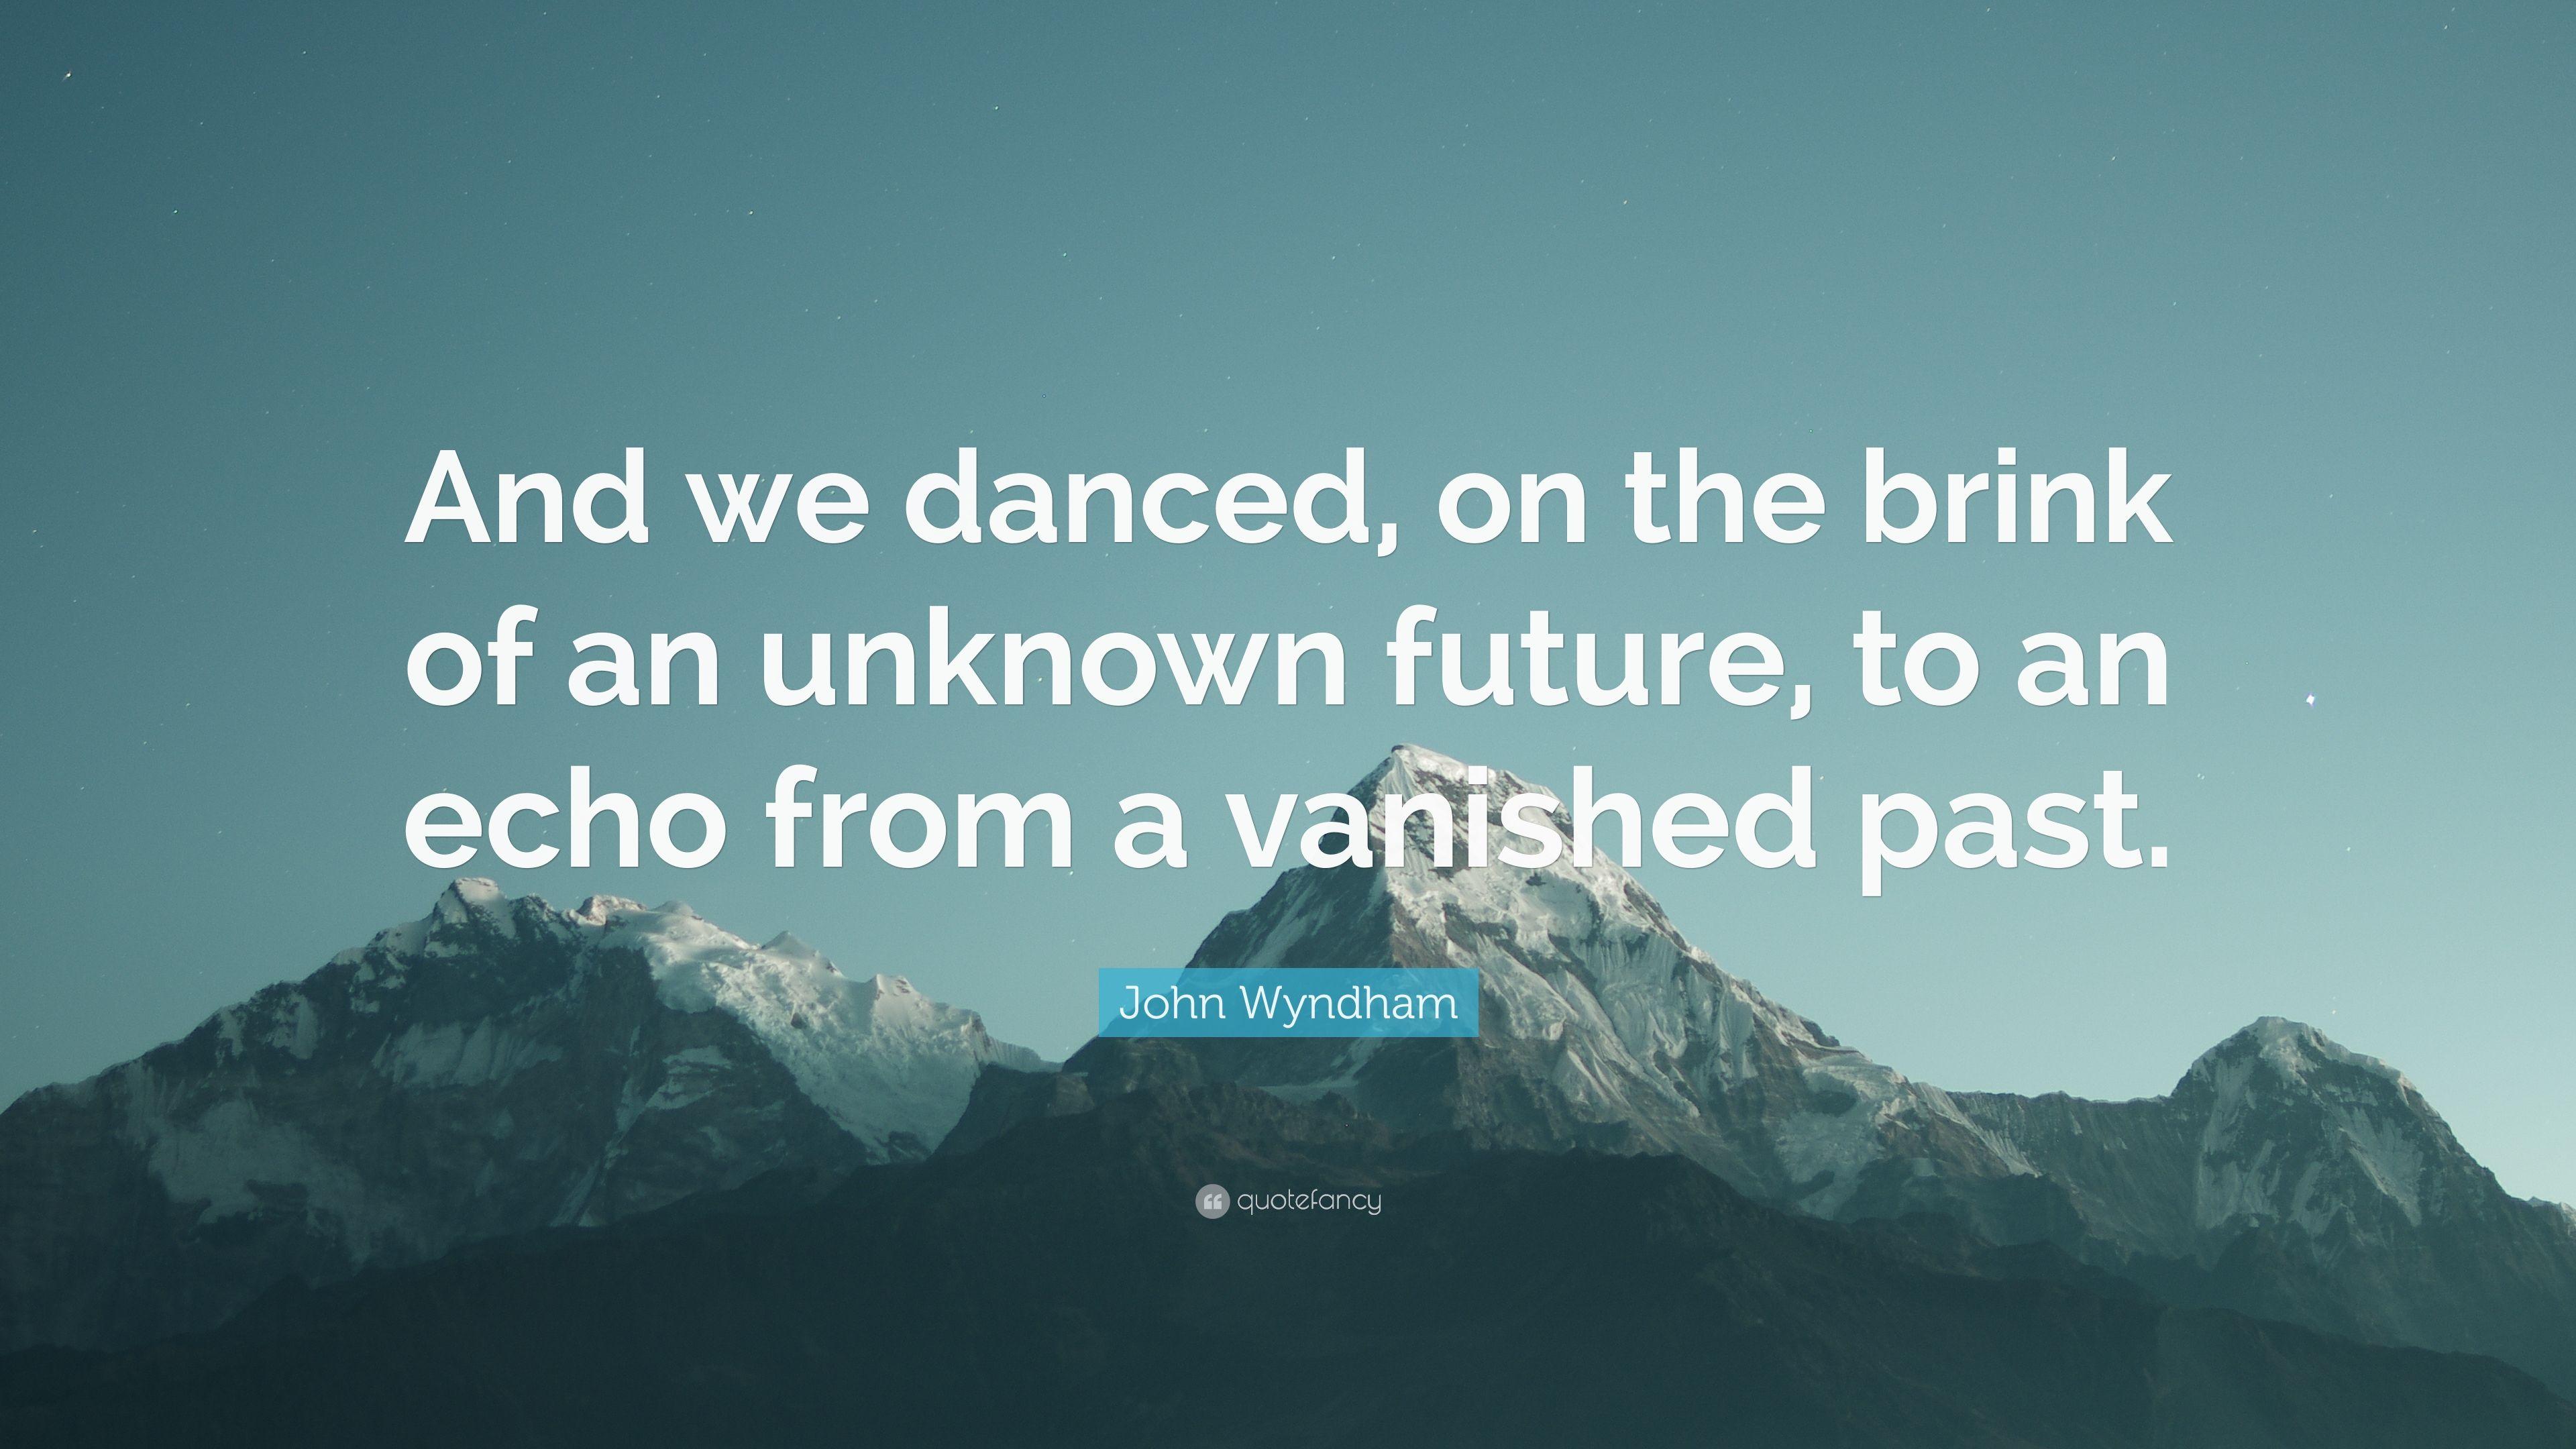 John Wyndham Quote: “And we danced, on the brink of an unknown